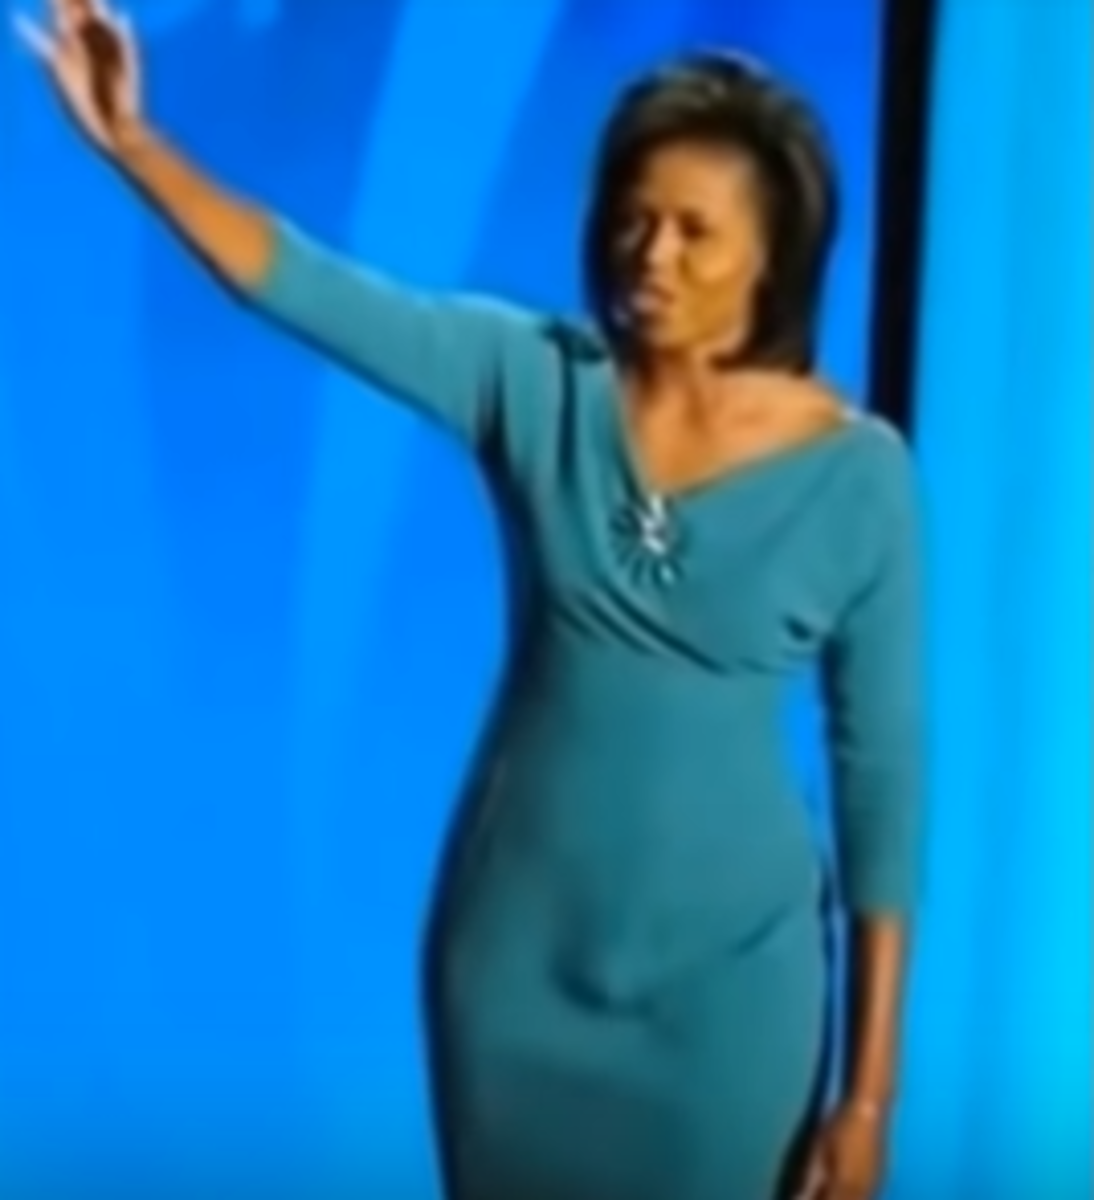 is-michelle-obama-really-a-woman